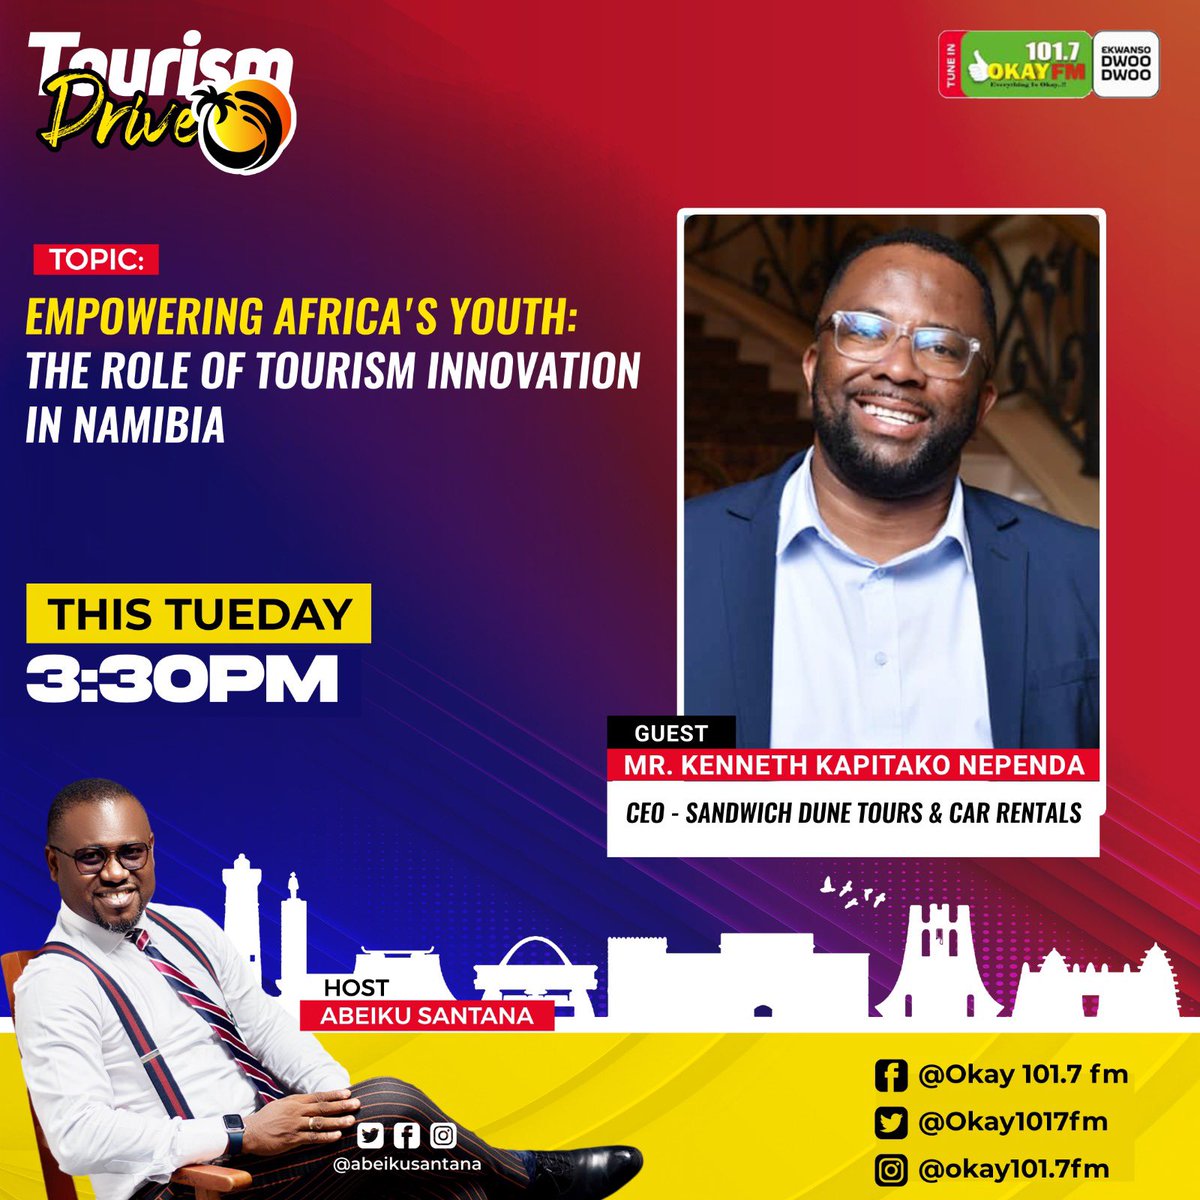 Join the conversation live on @Okay1017fm topic: Empowering Africa’s Youth : The role of Tourism Innovation in Namibia 🇳🇦 Our guest : Mr Kenneth Kapitako , the CEO of Sandwich Dune Tours , Car & Rentals #mrtourism #abeikusantana #namibia #travelnamibia